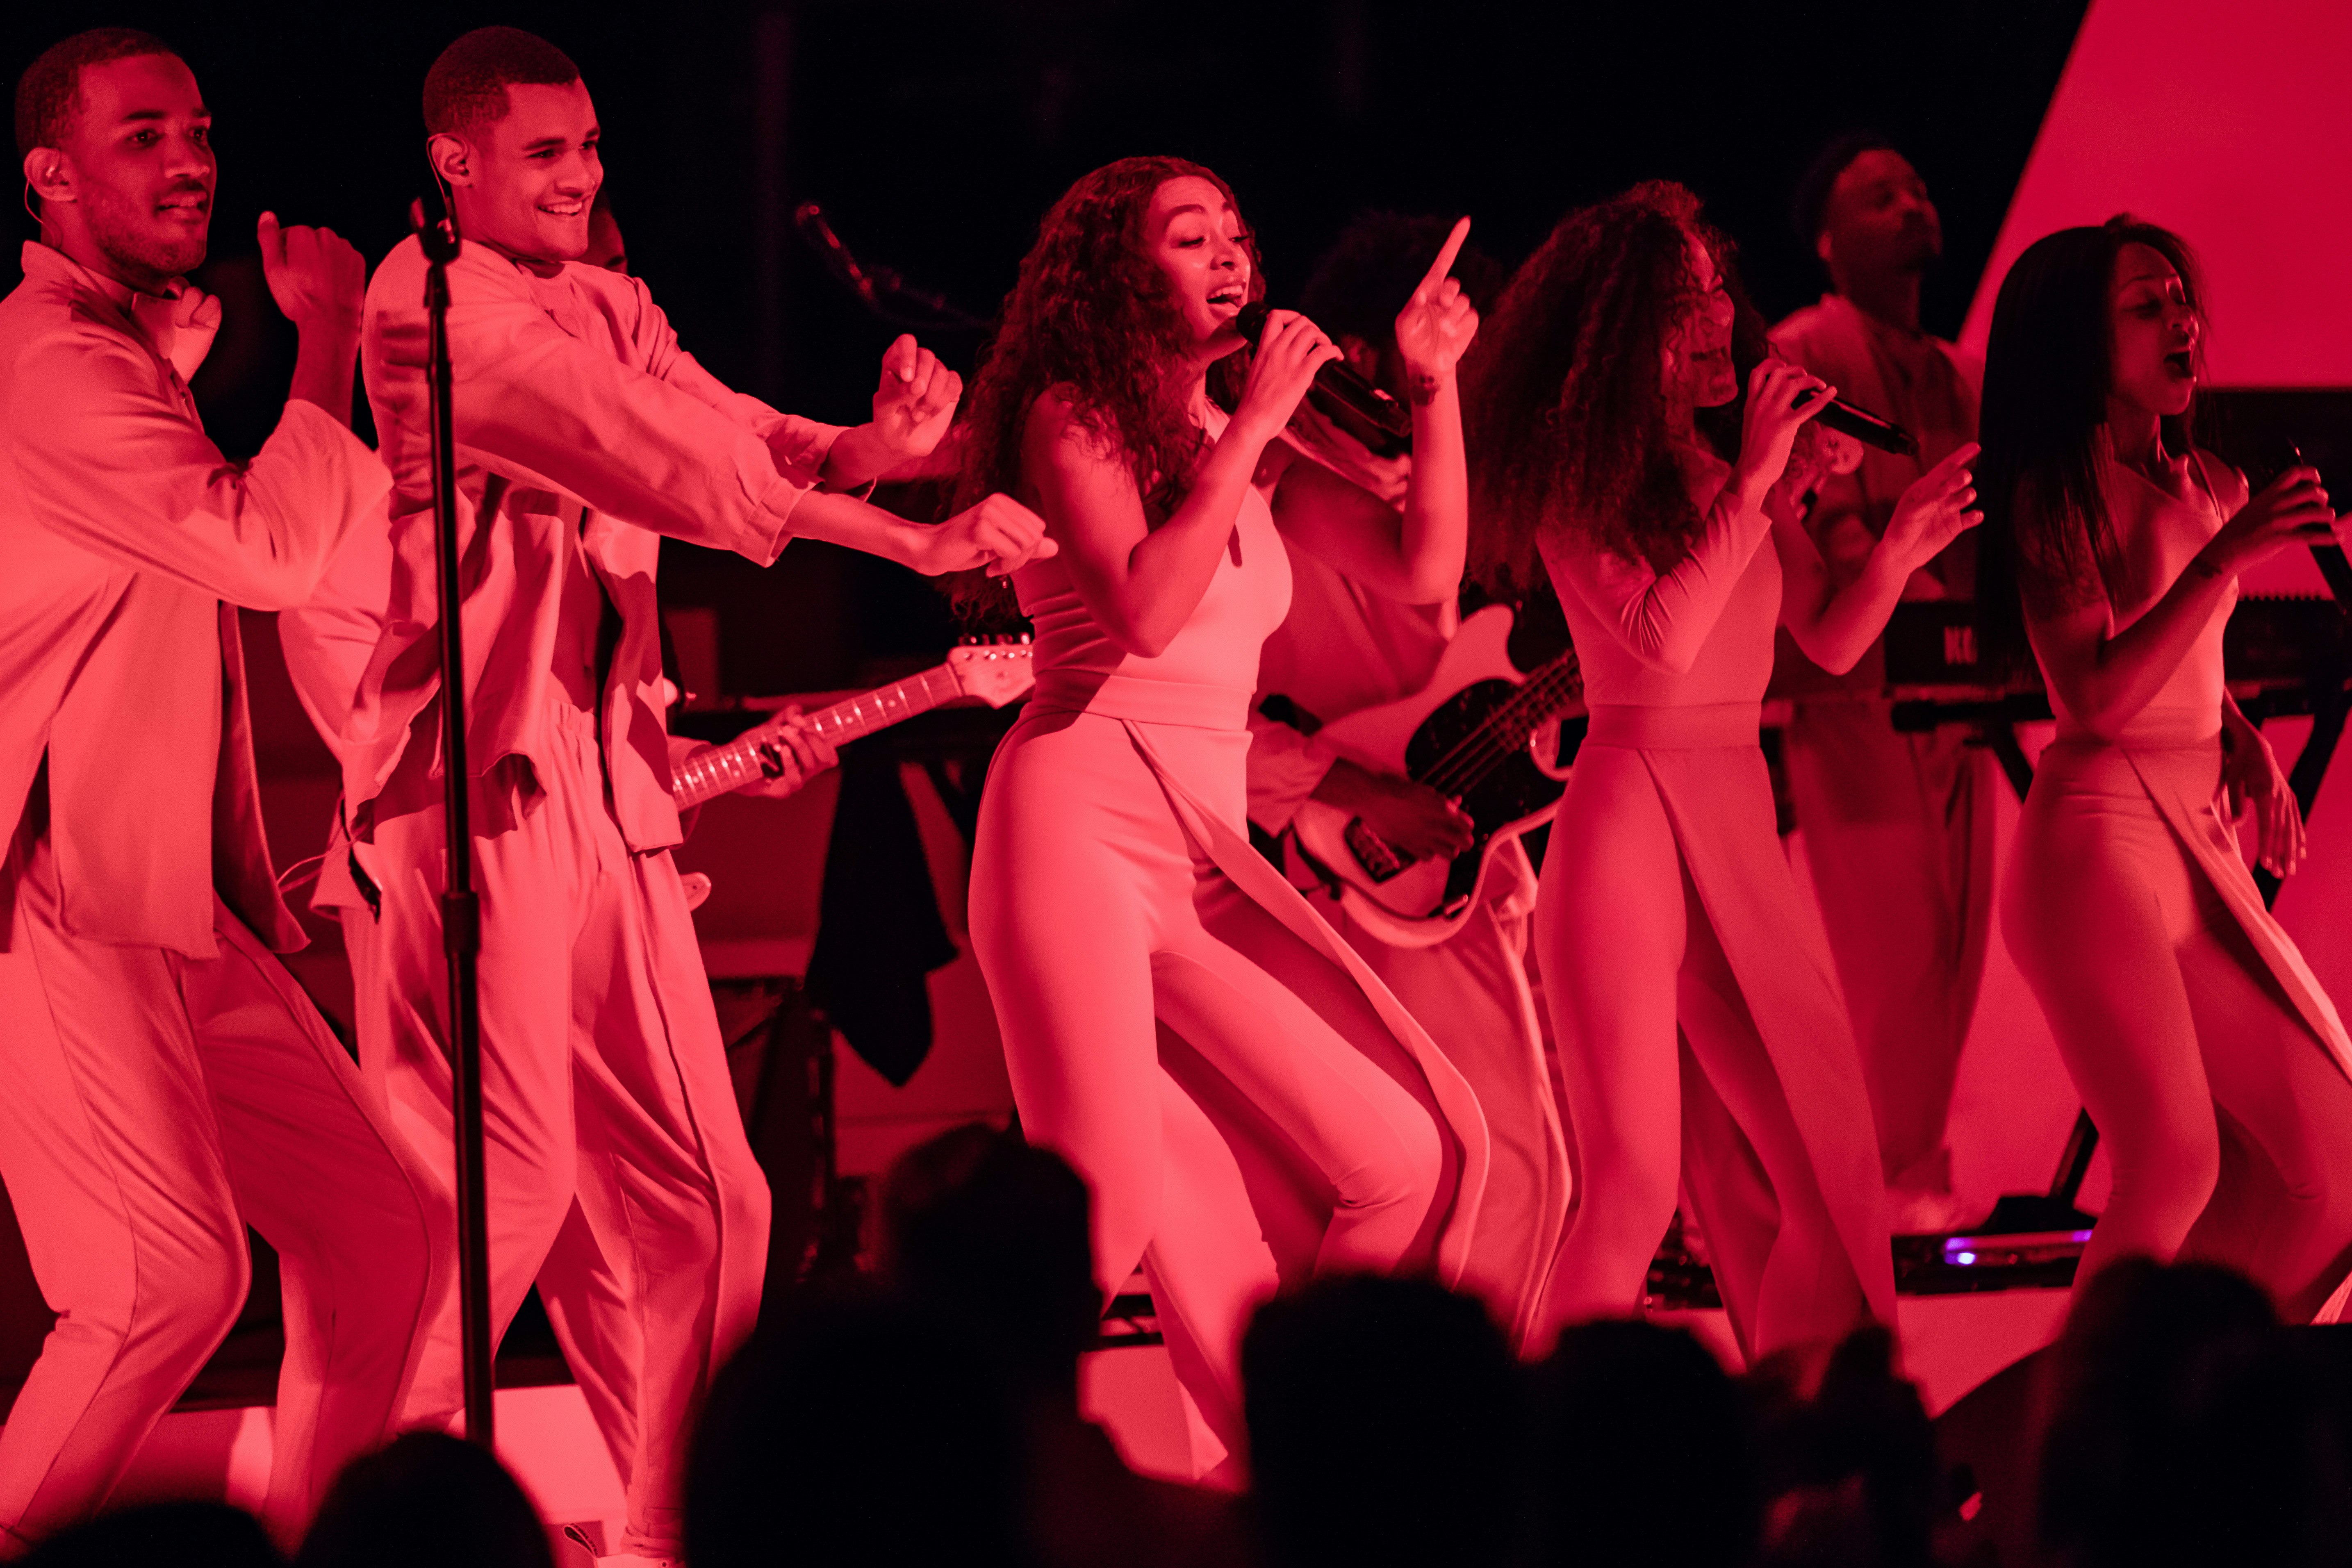 Solange on stage with dancers and red lighting